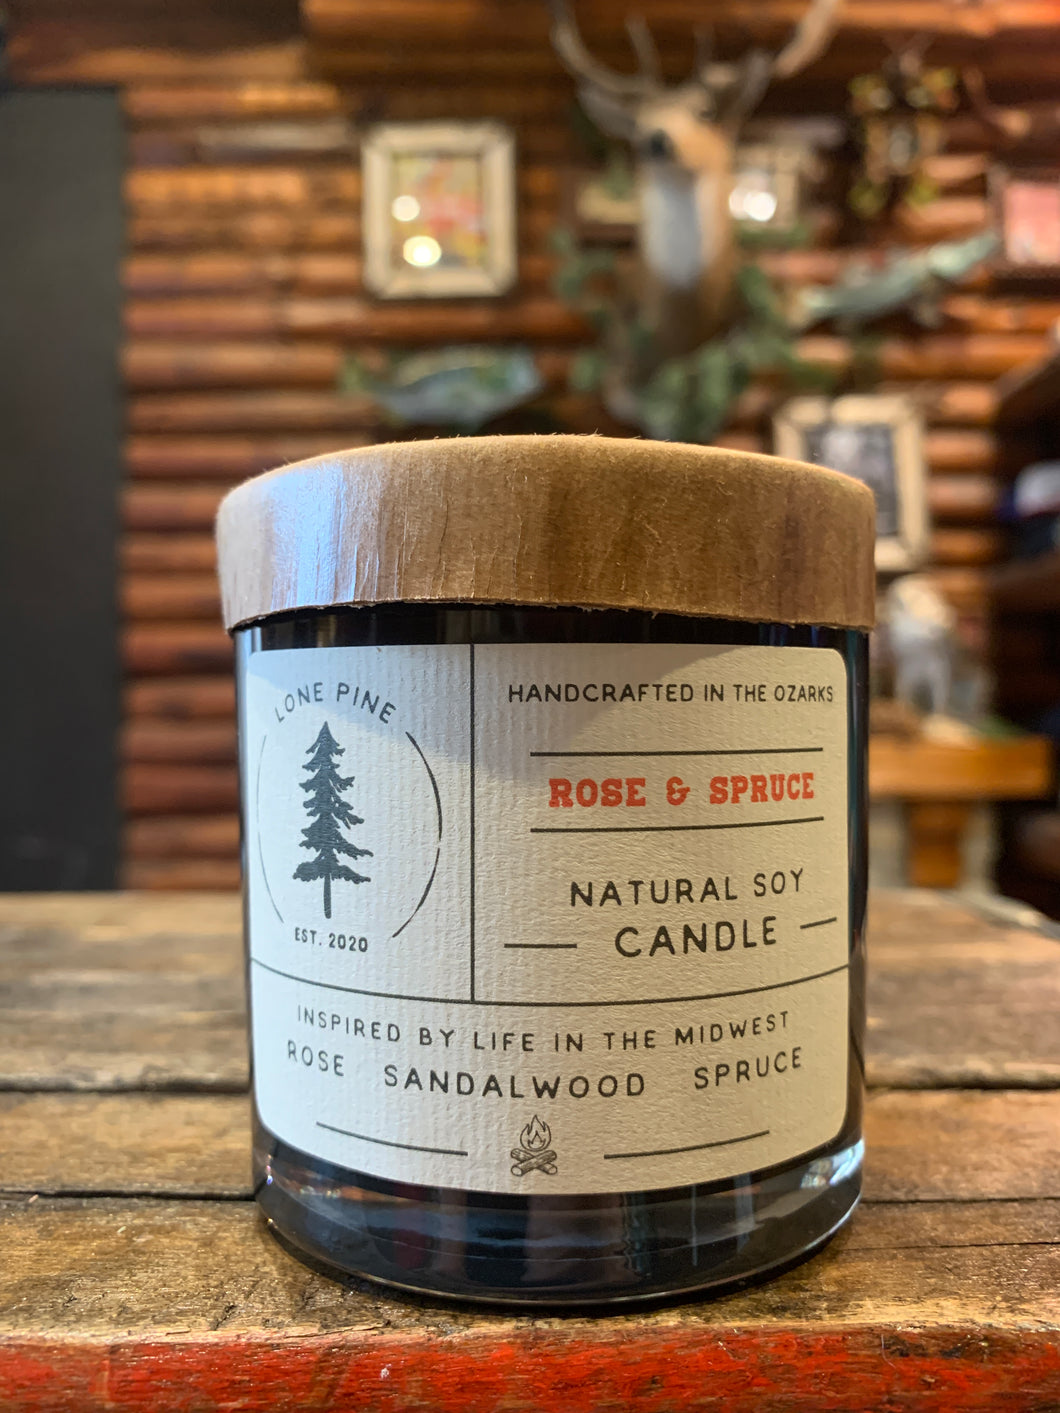 American Heritage Rose & Spruce Soy Candle, USA